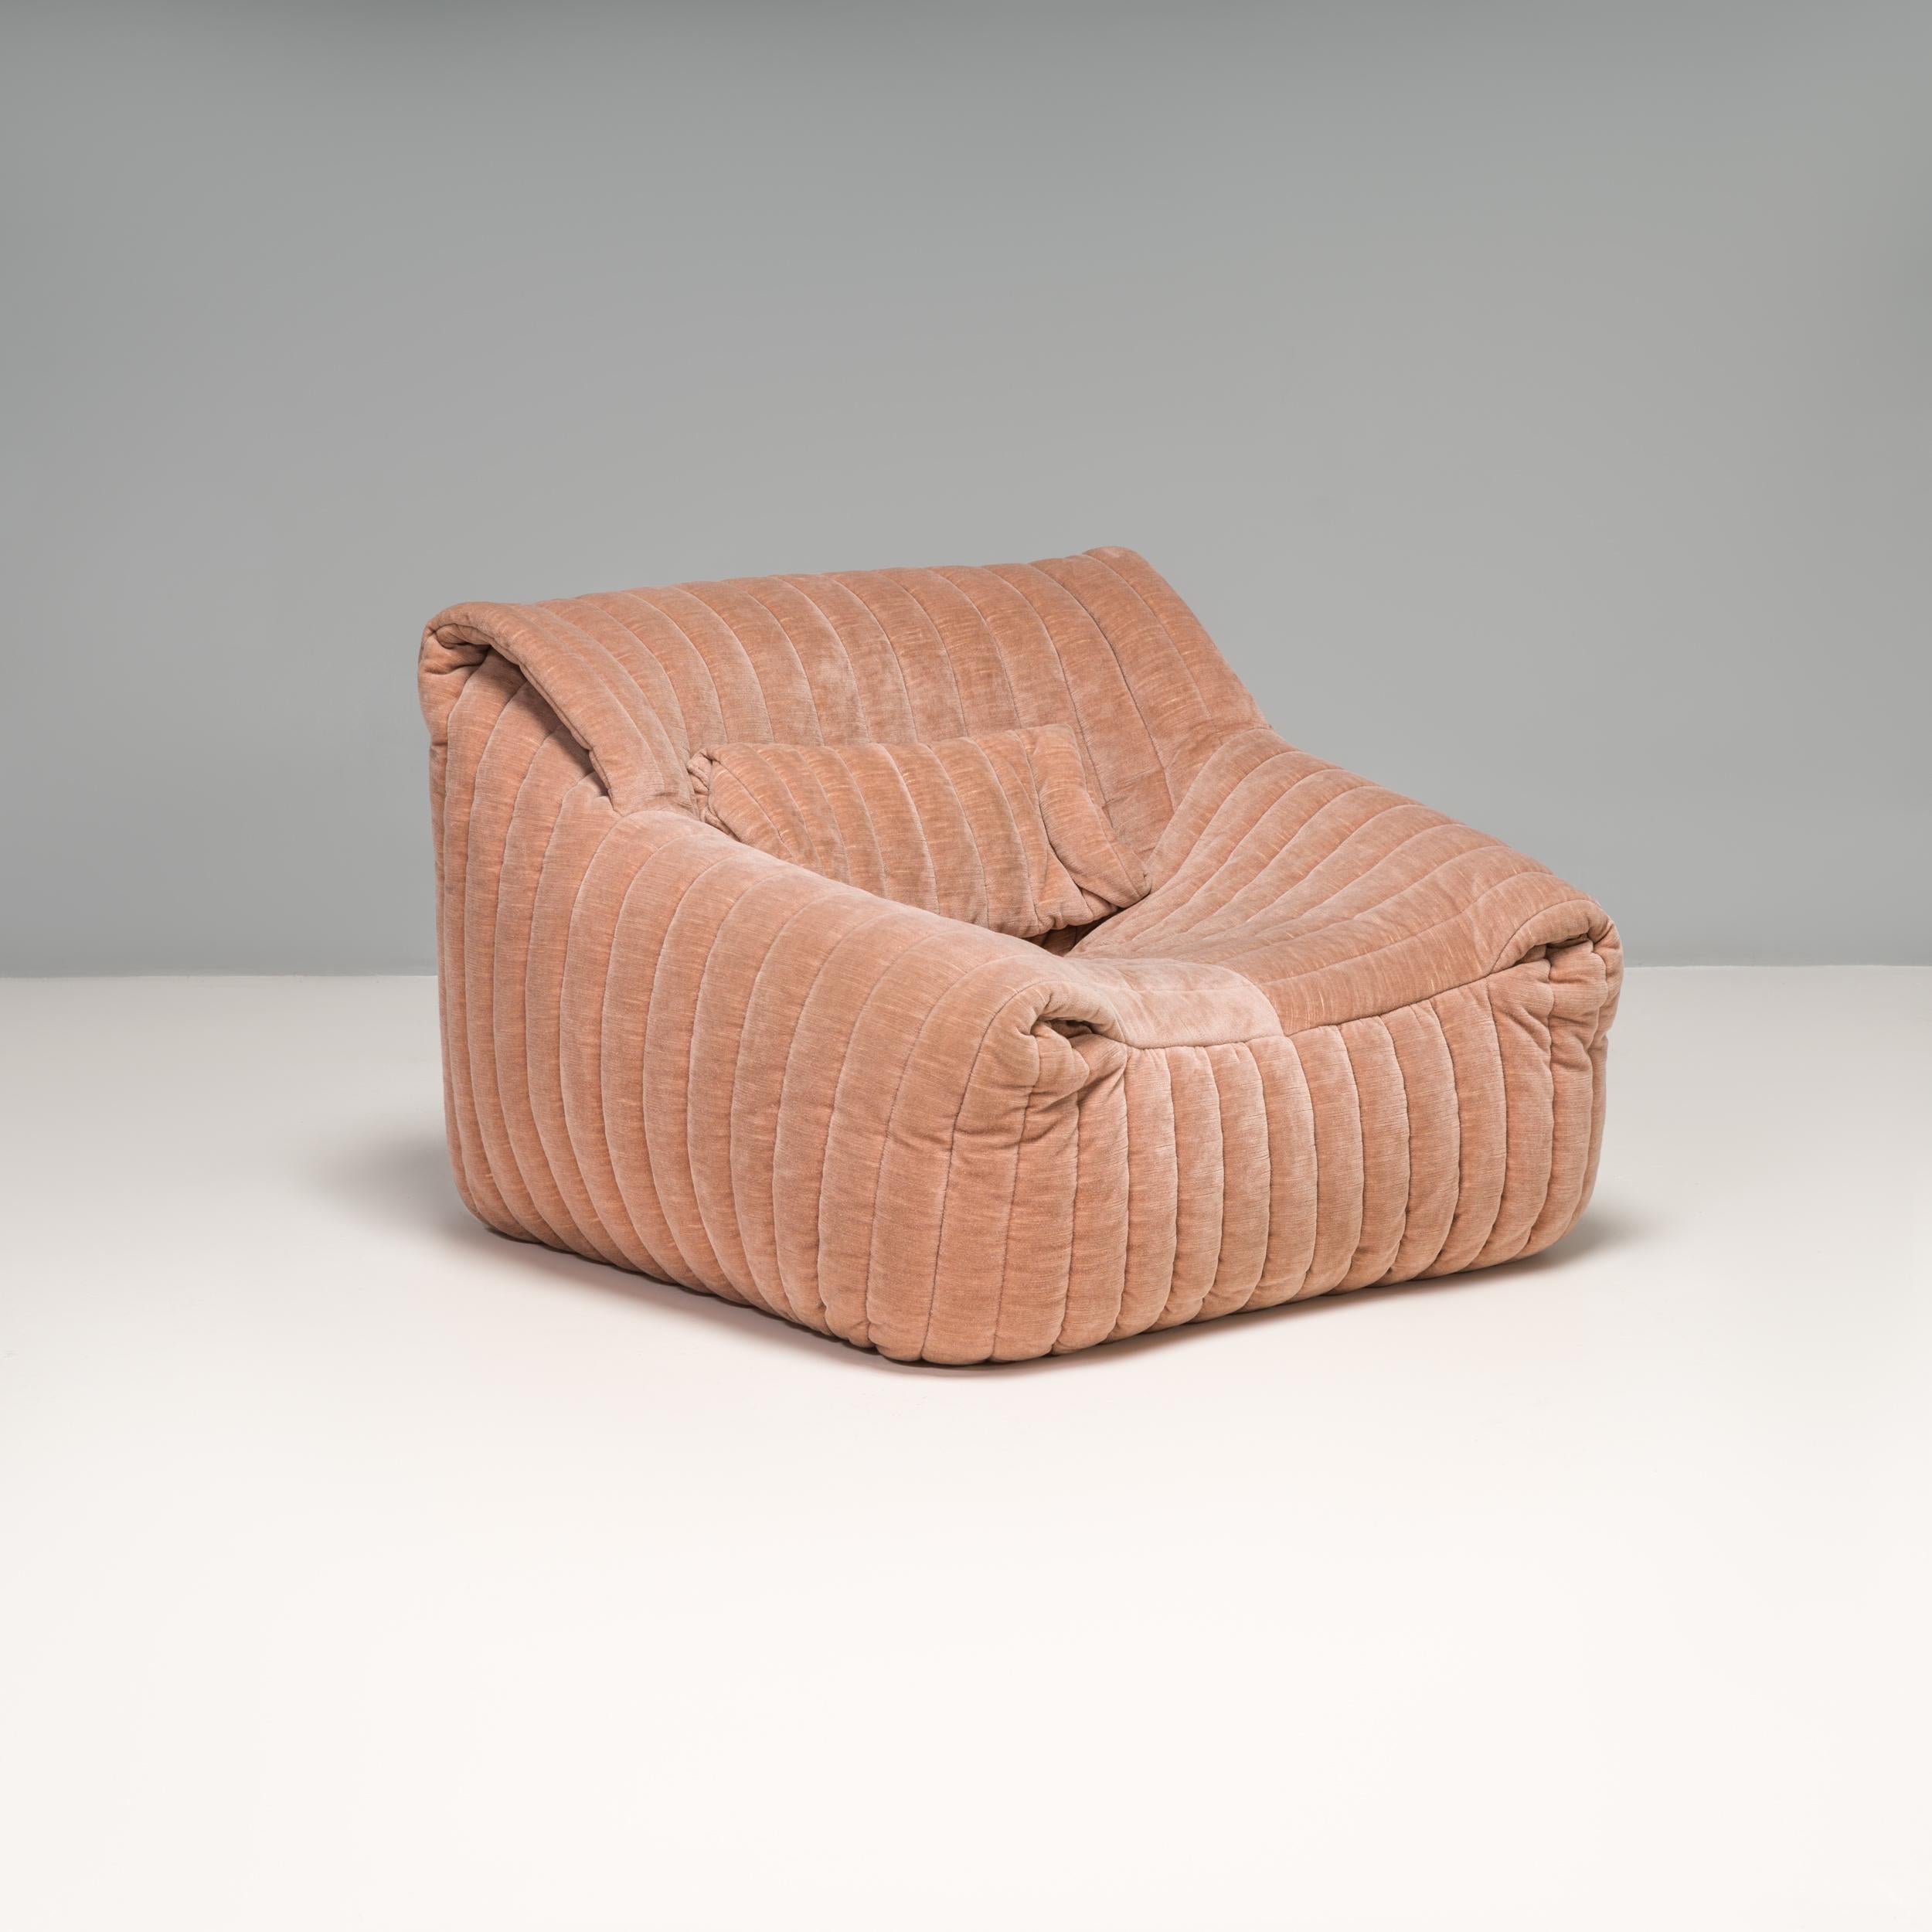 An iconic 1970s design, the Sandra sofa collection was designed by Annie Hiéronimus for Cinna after she joined the Roset Bureau d'Etudes in 1976.

Constructed from foam, this armchair has a solid form which is fully upholstered in salmon pink ribbed